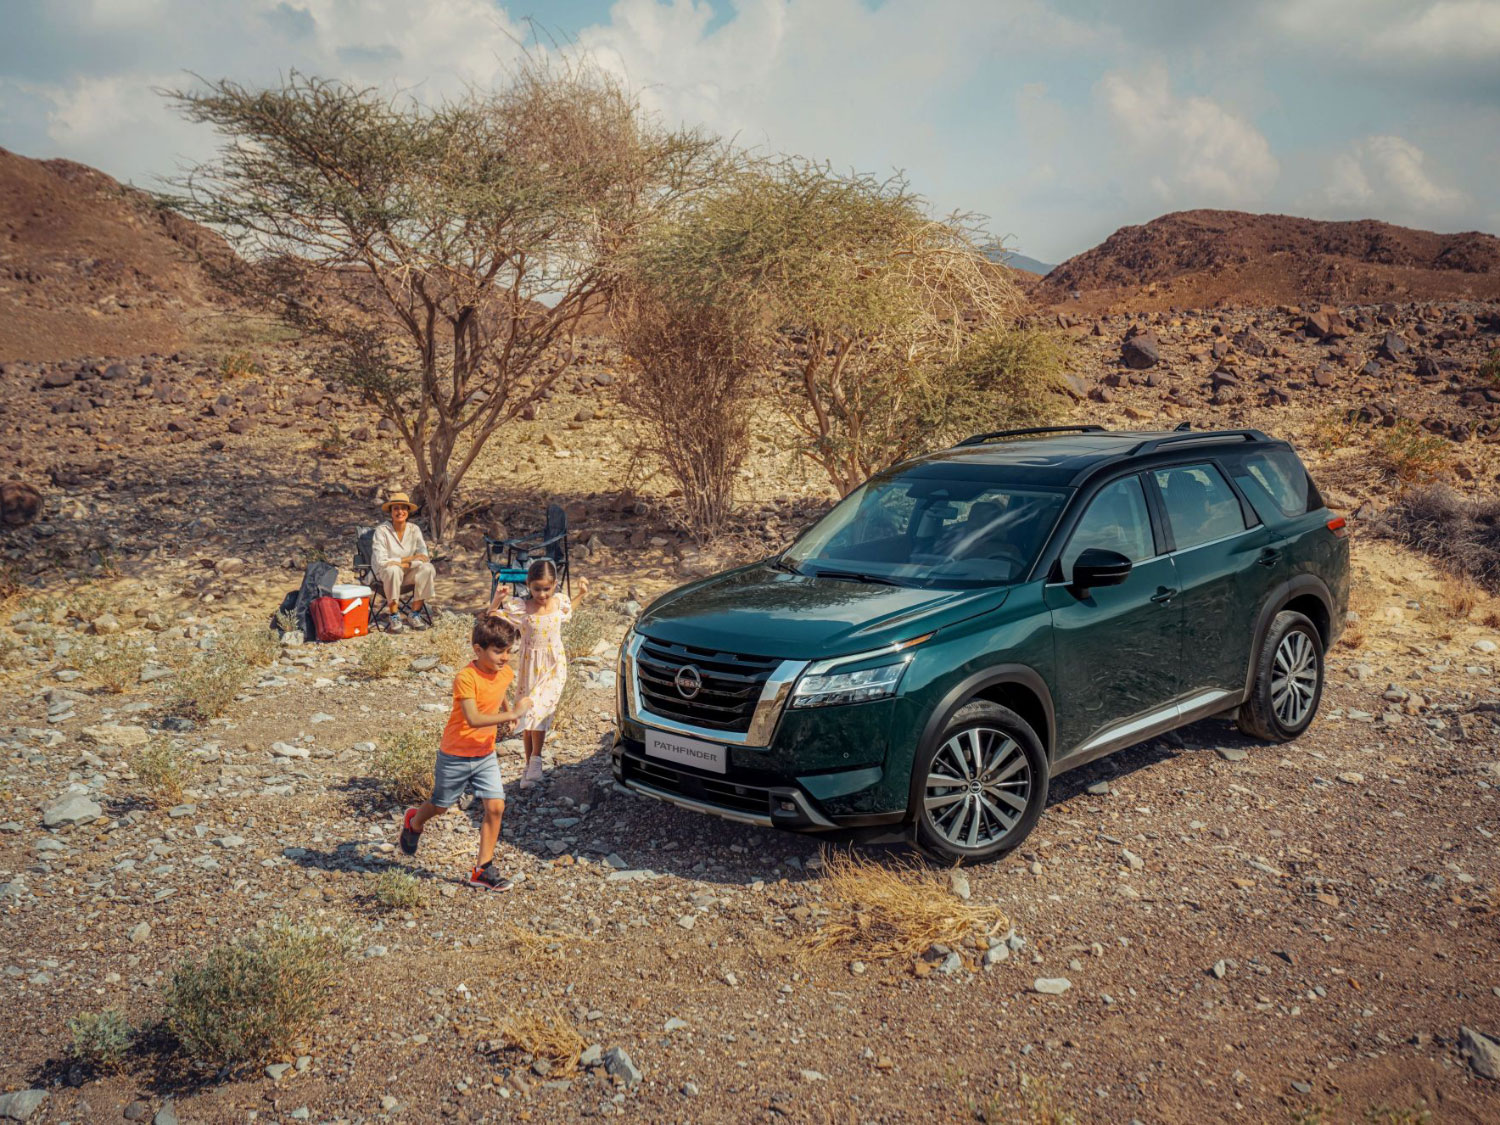 Nissan presents six family-friendly features that set the Pathfinder apart